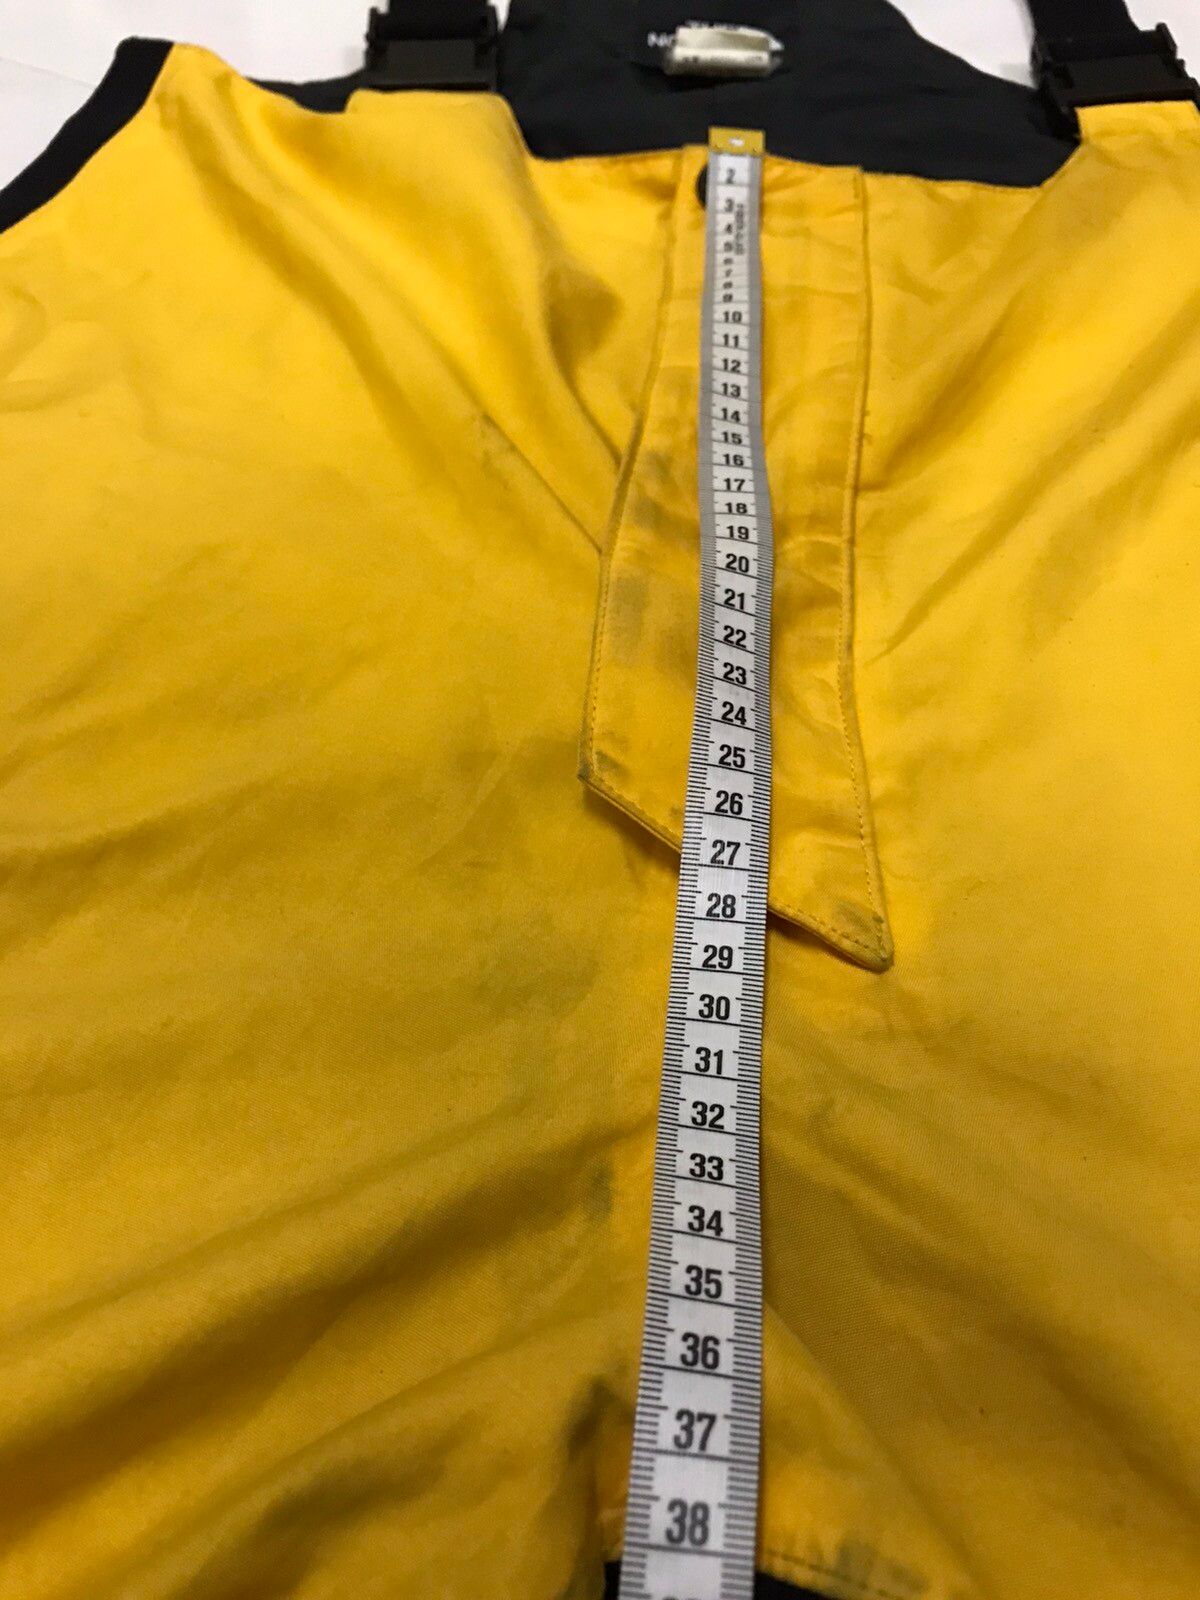 THE NORTH FACE” GORE-TEX SKI PANTS BIBS OVERALLS IN YELLOW - 13